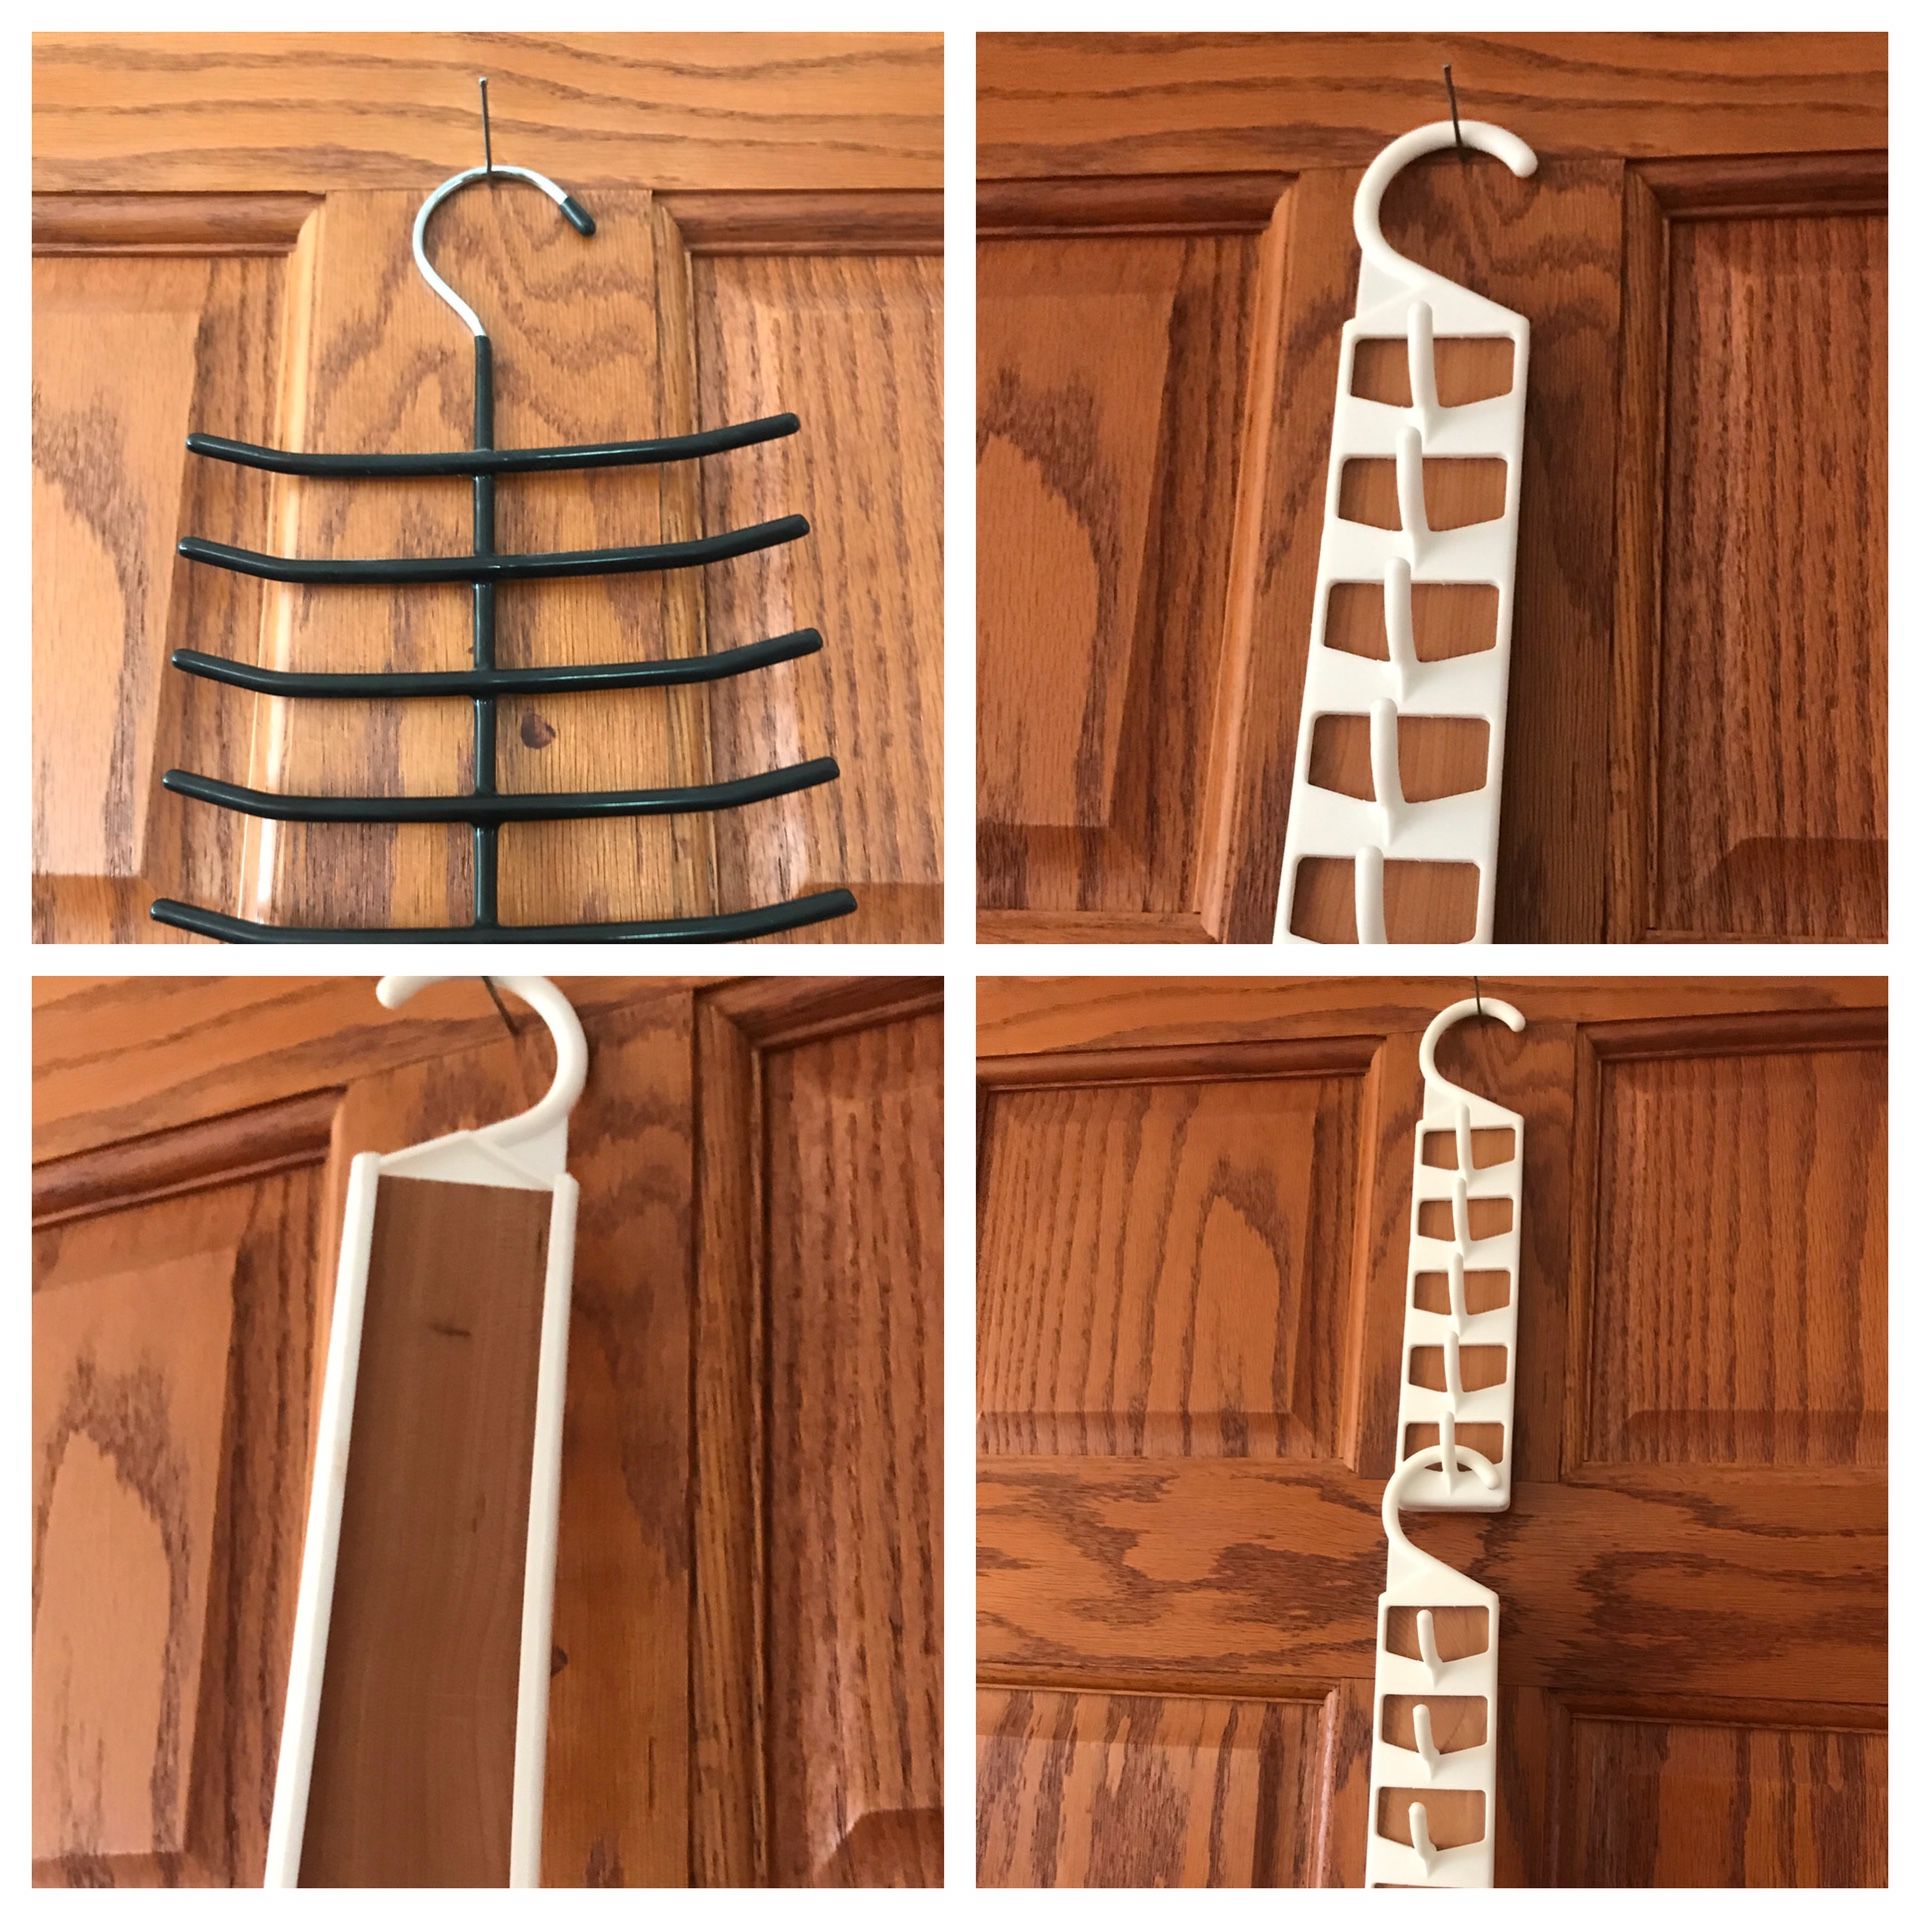 Jewelry Ties or belts! Closet organizers (2 with cedar). All 4 are $4